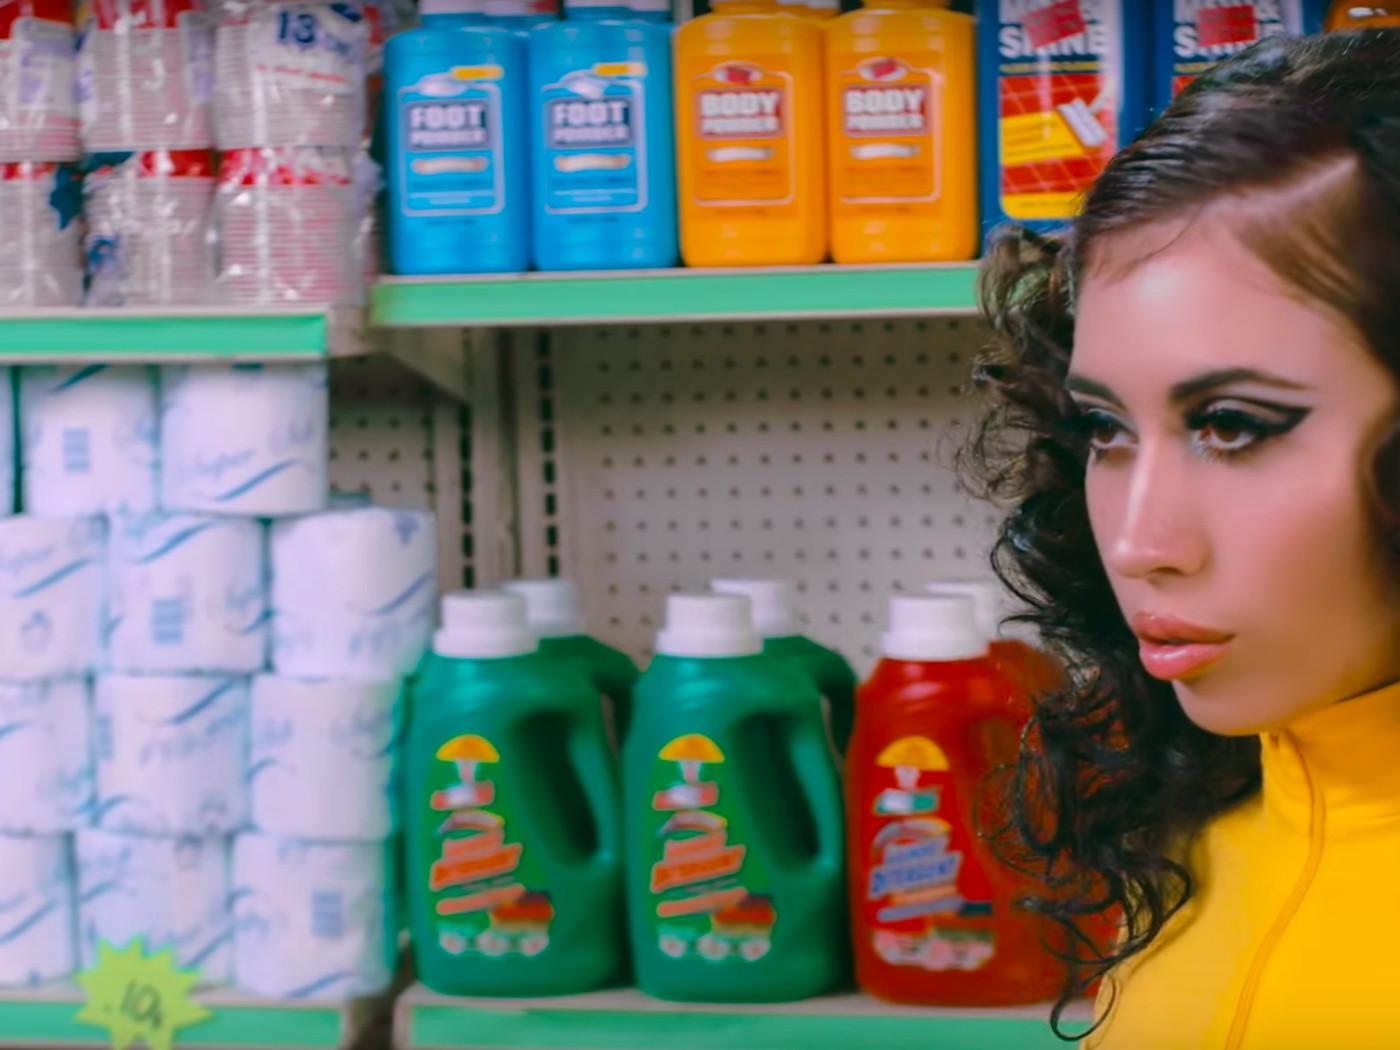 In Kali Uchis' After the Storm video, money can buy love